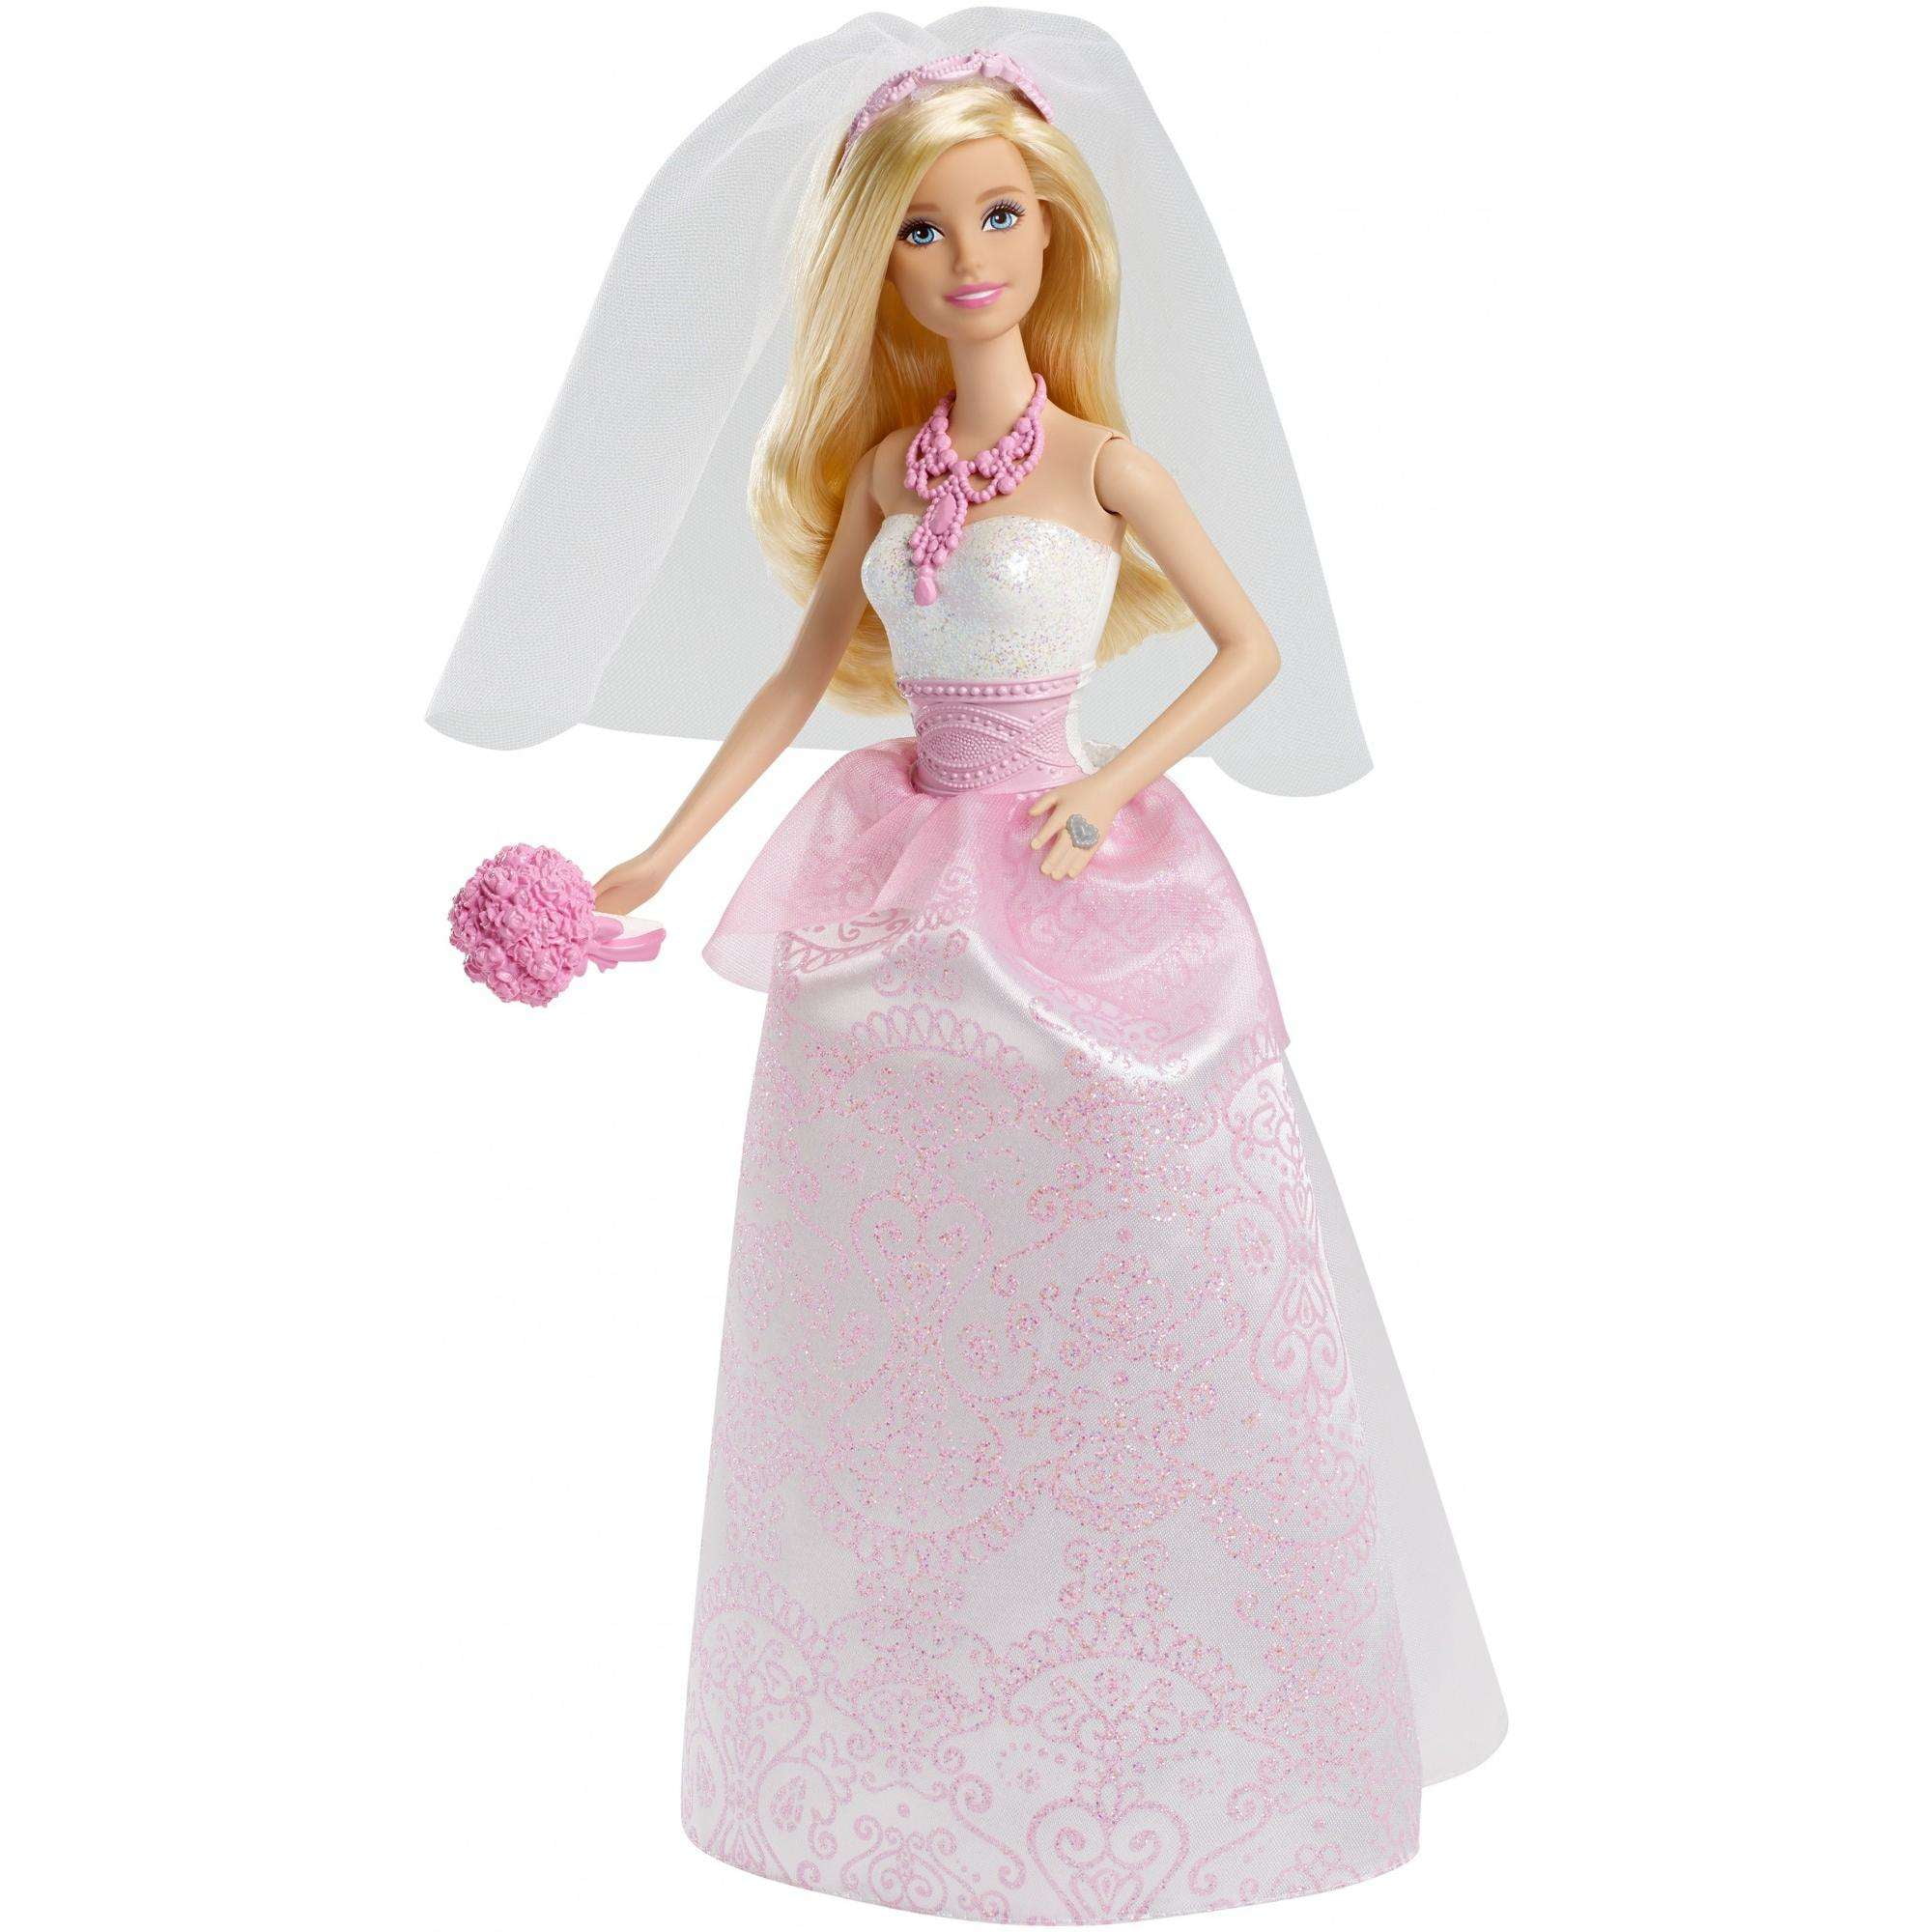 White Fashion Doll Wedding Dress For 11.5" Doll Outfits & Veil Doll Accessories 